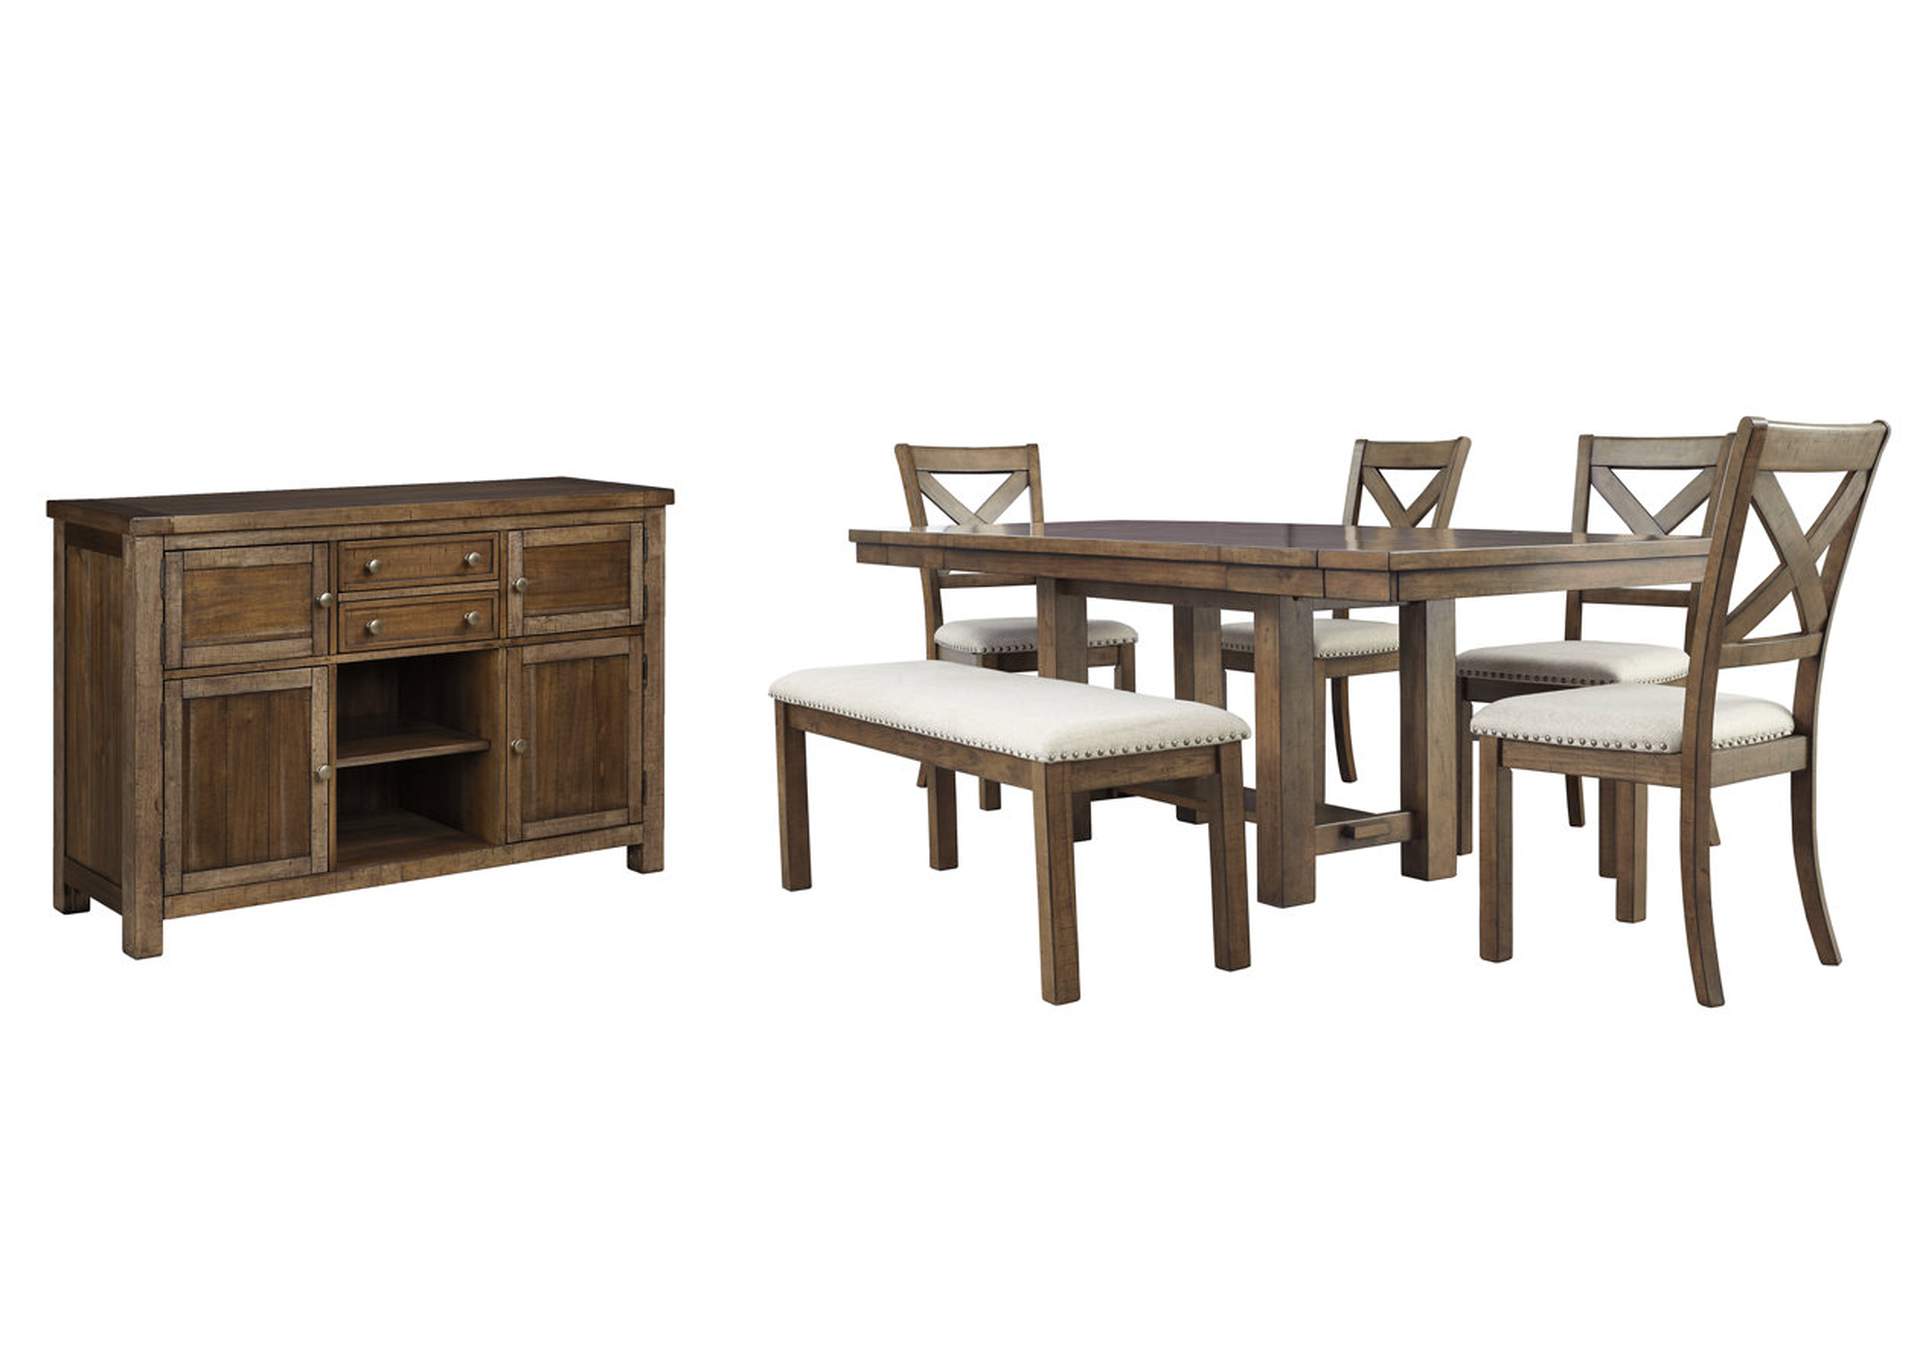 Moriville Dining Table and 4 Chairs and Bench with Storage,Signature Design By Ashley